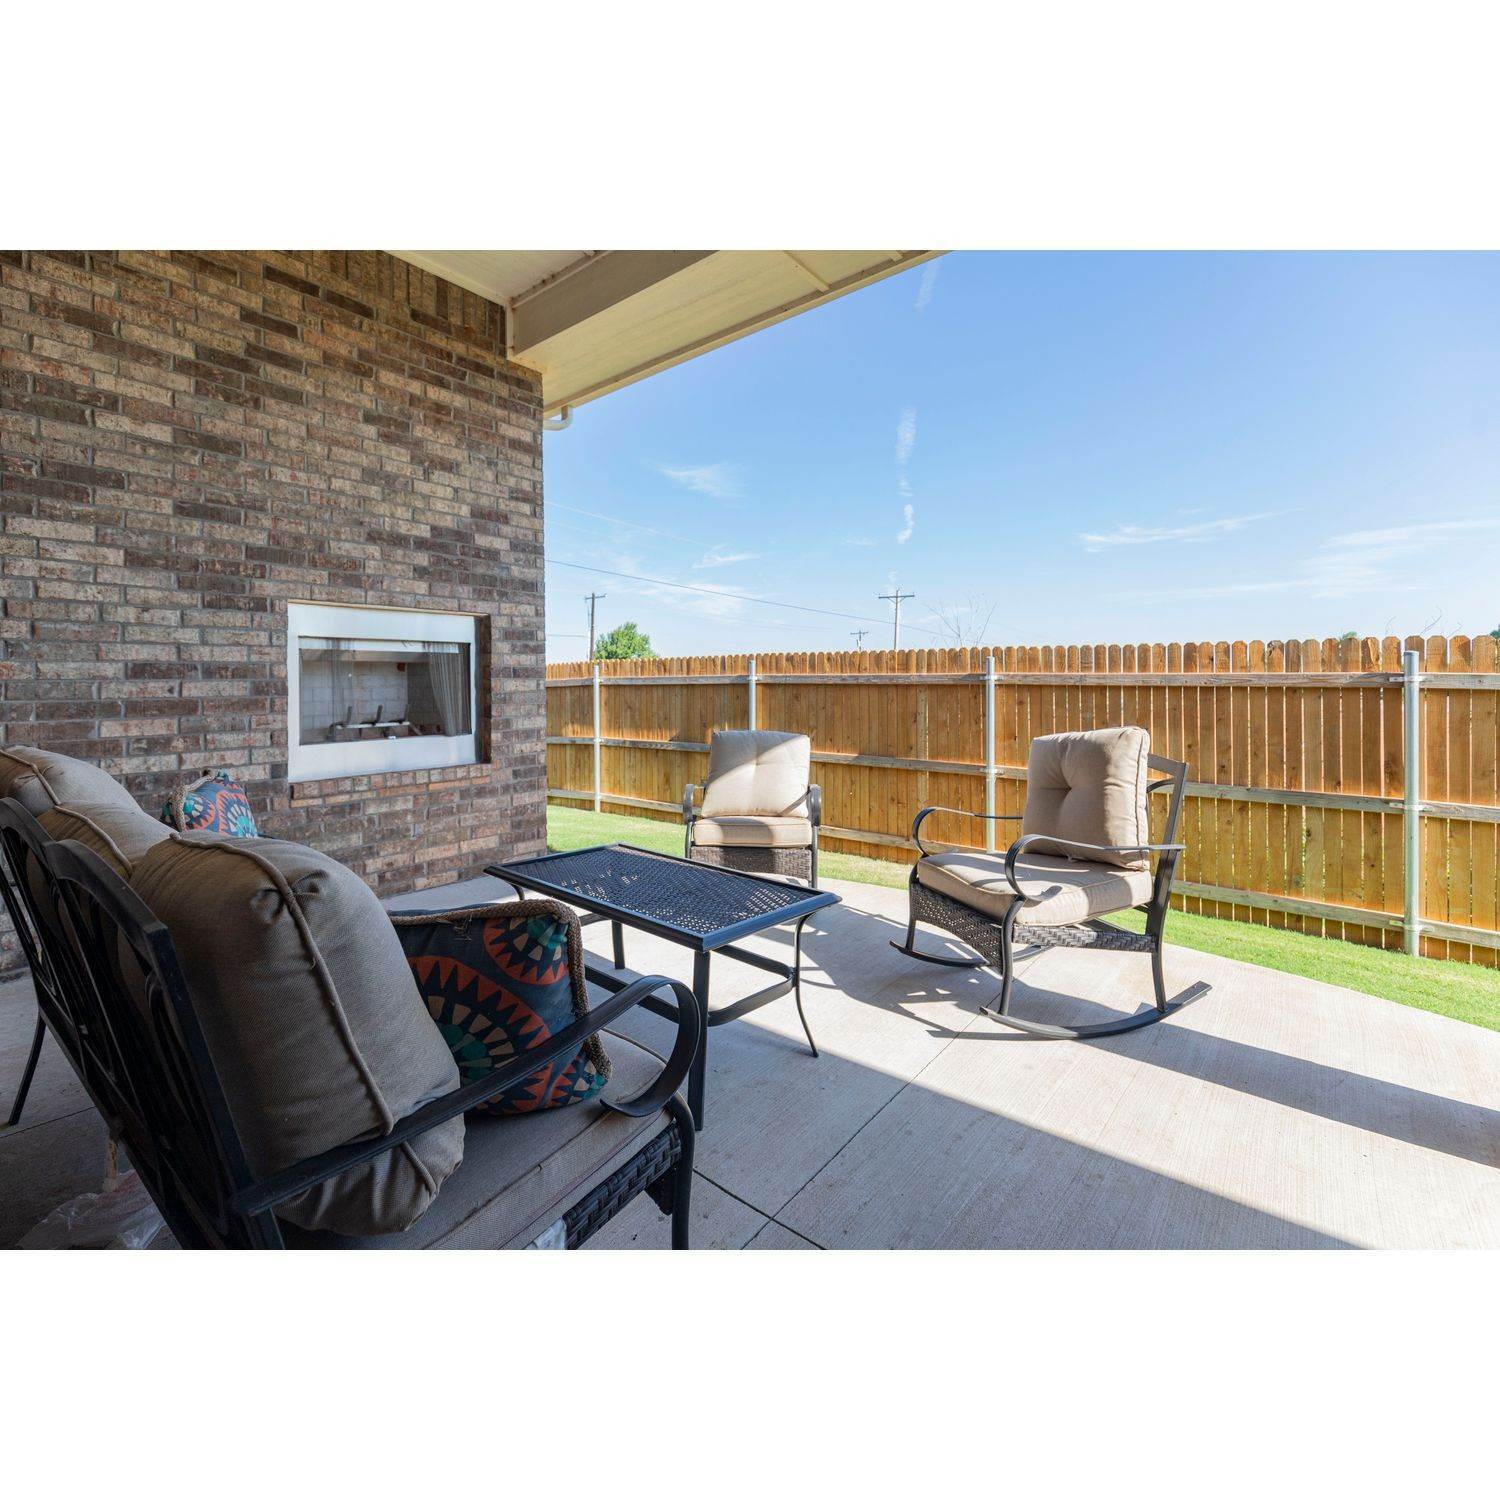 48. Canyons bâtiment à 10533 SW 52nd St, Mustang, OK 73064